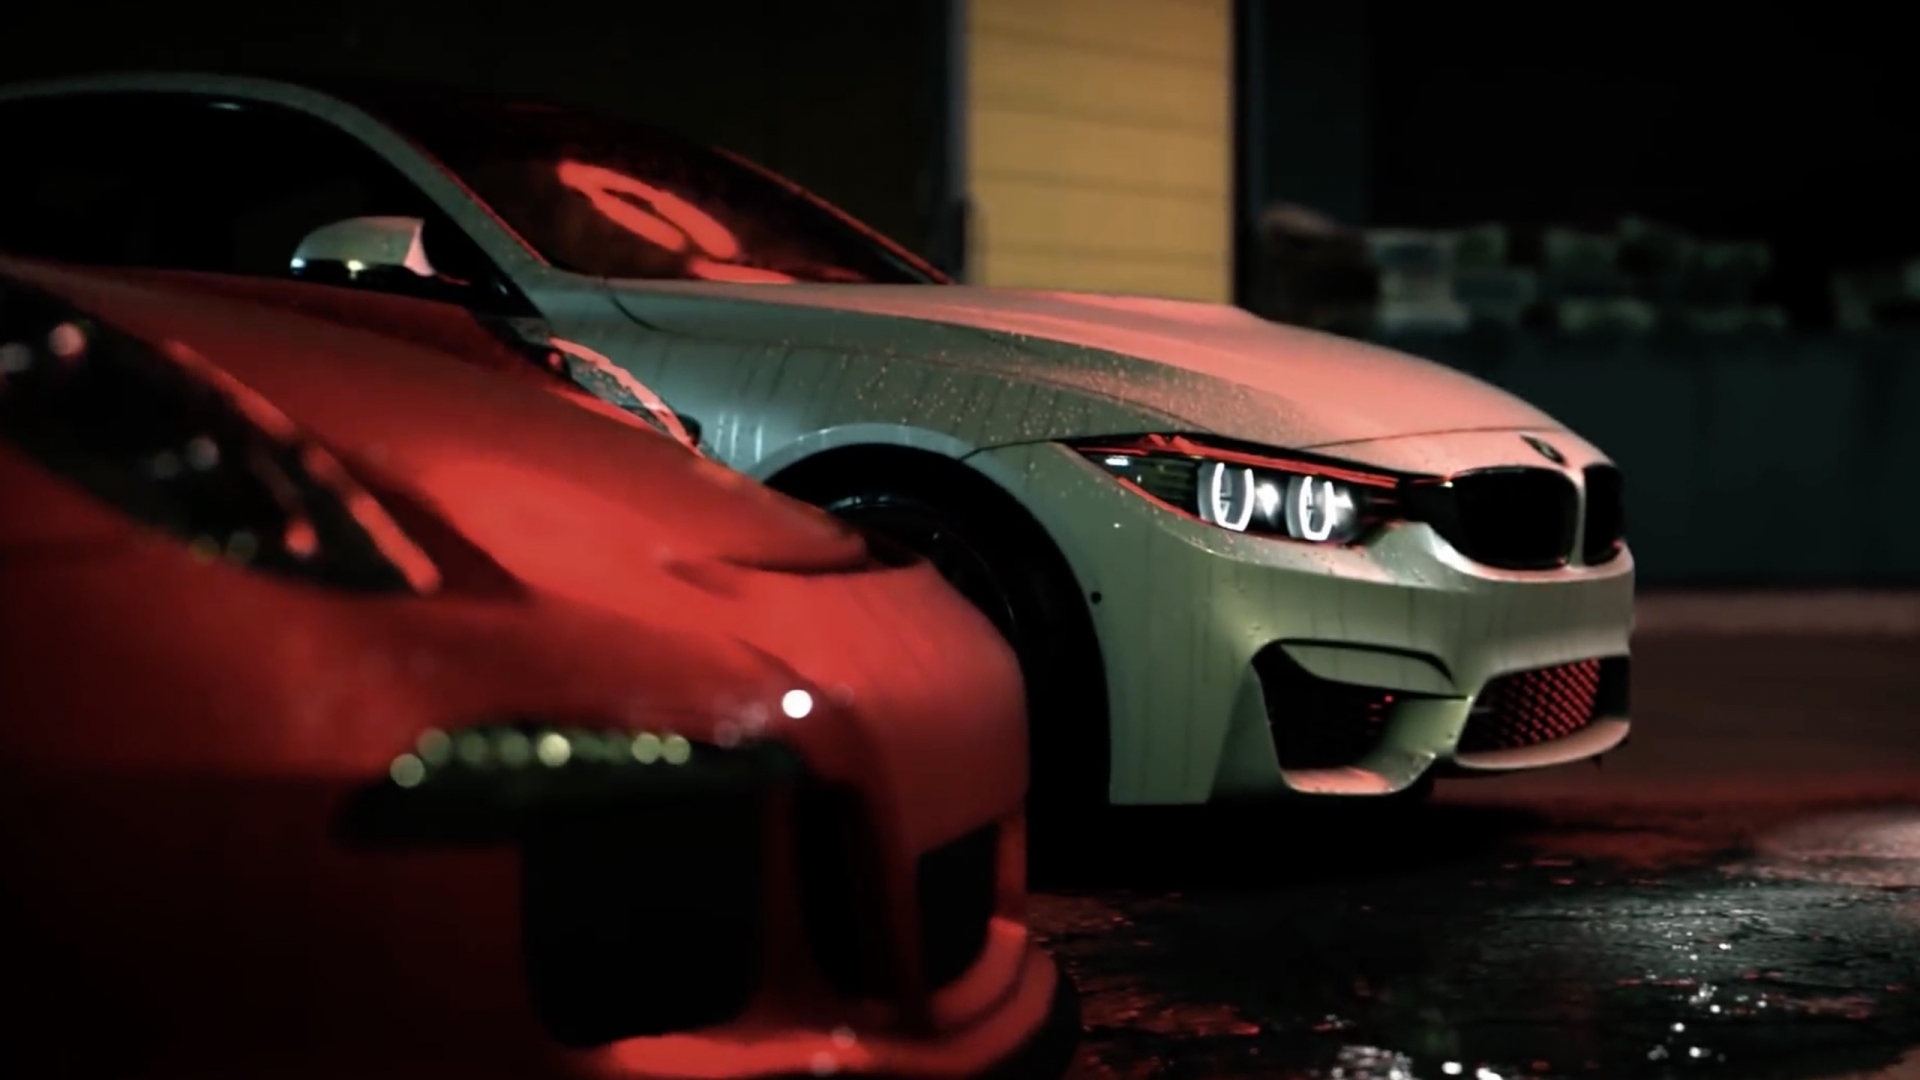 Need For Speed BMW and Porsche for 1920 x 1080 HDTV 1080p resolution